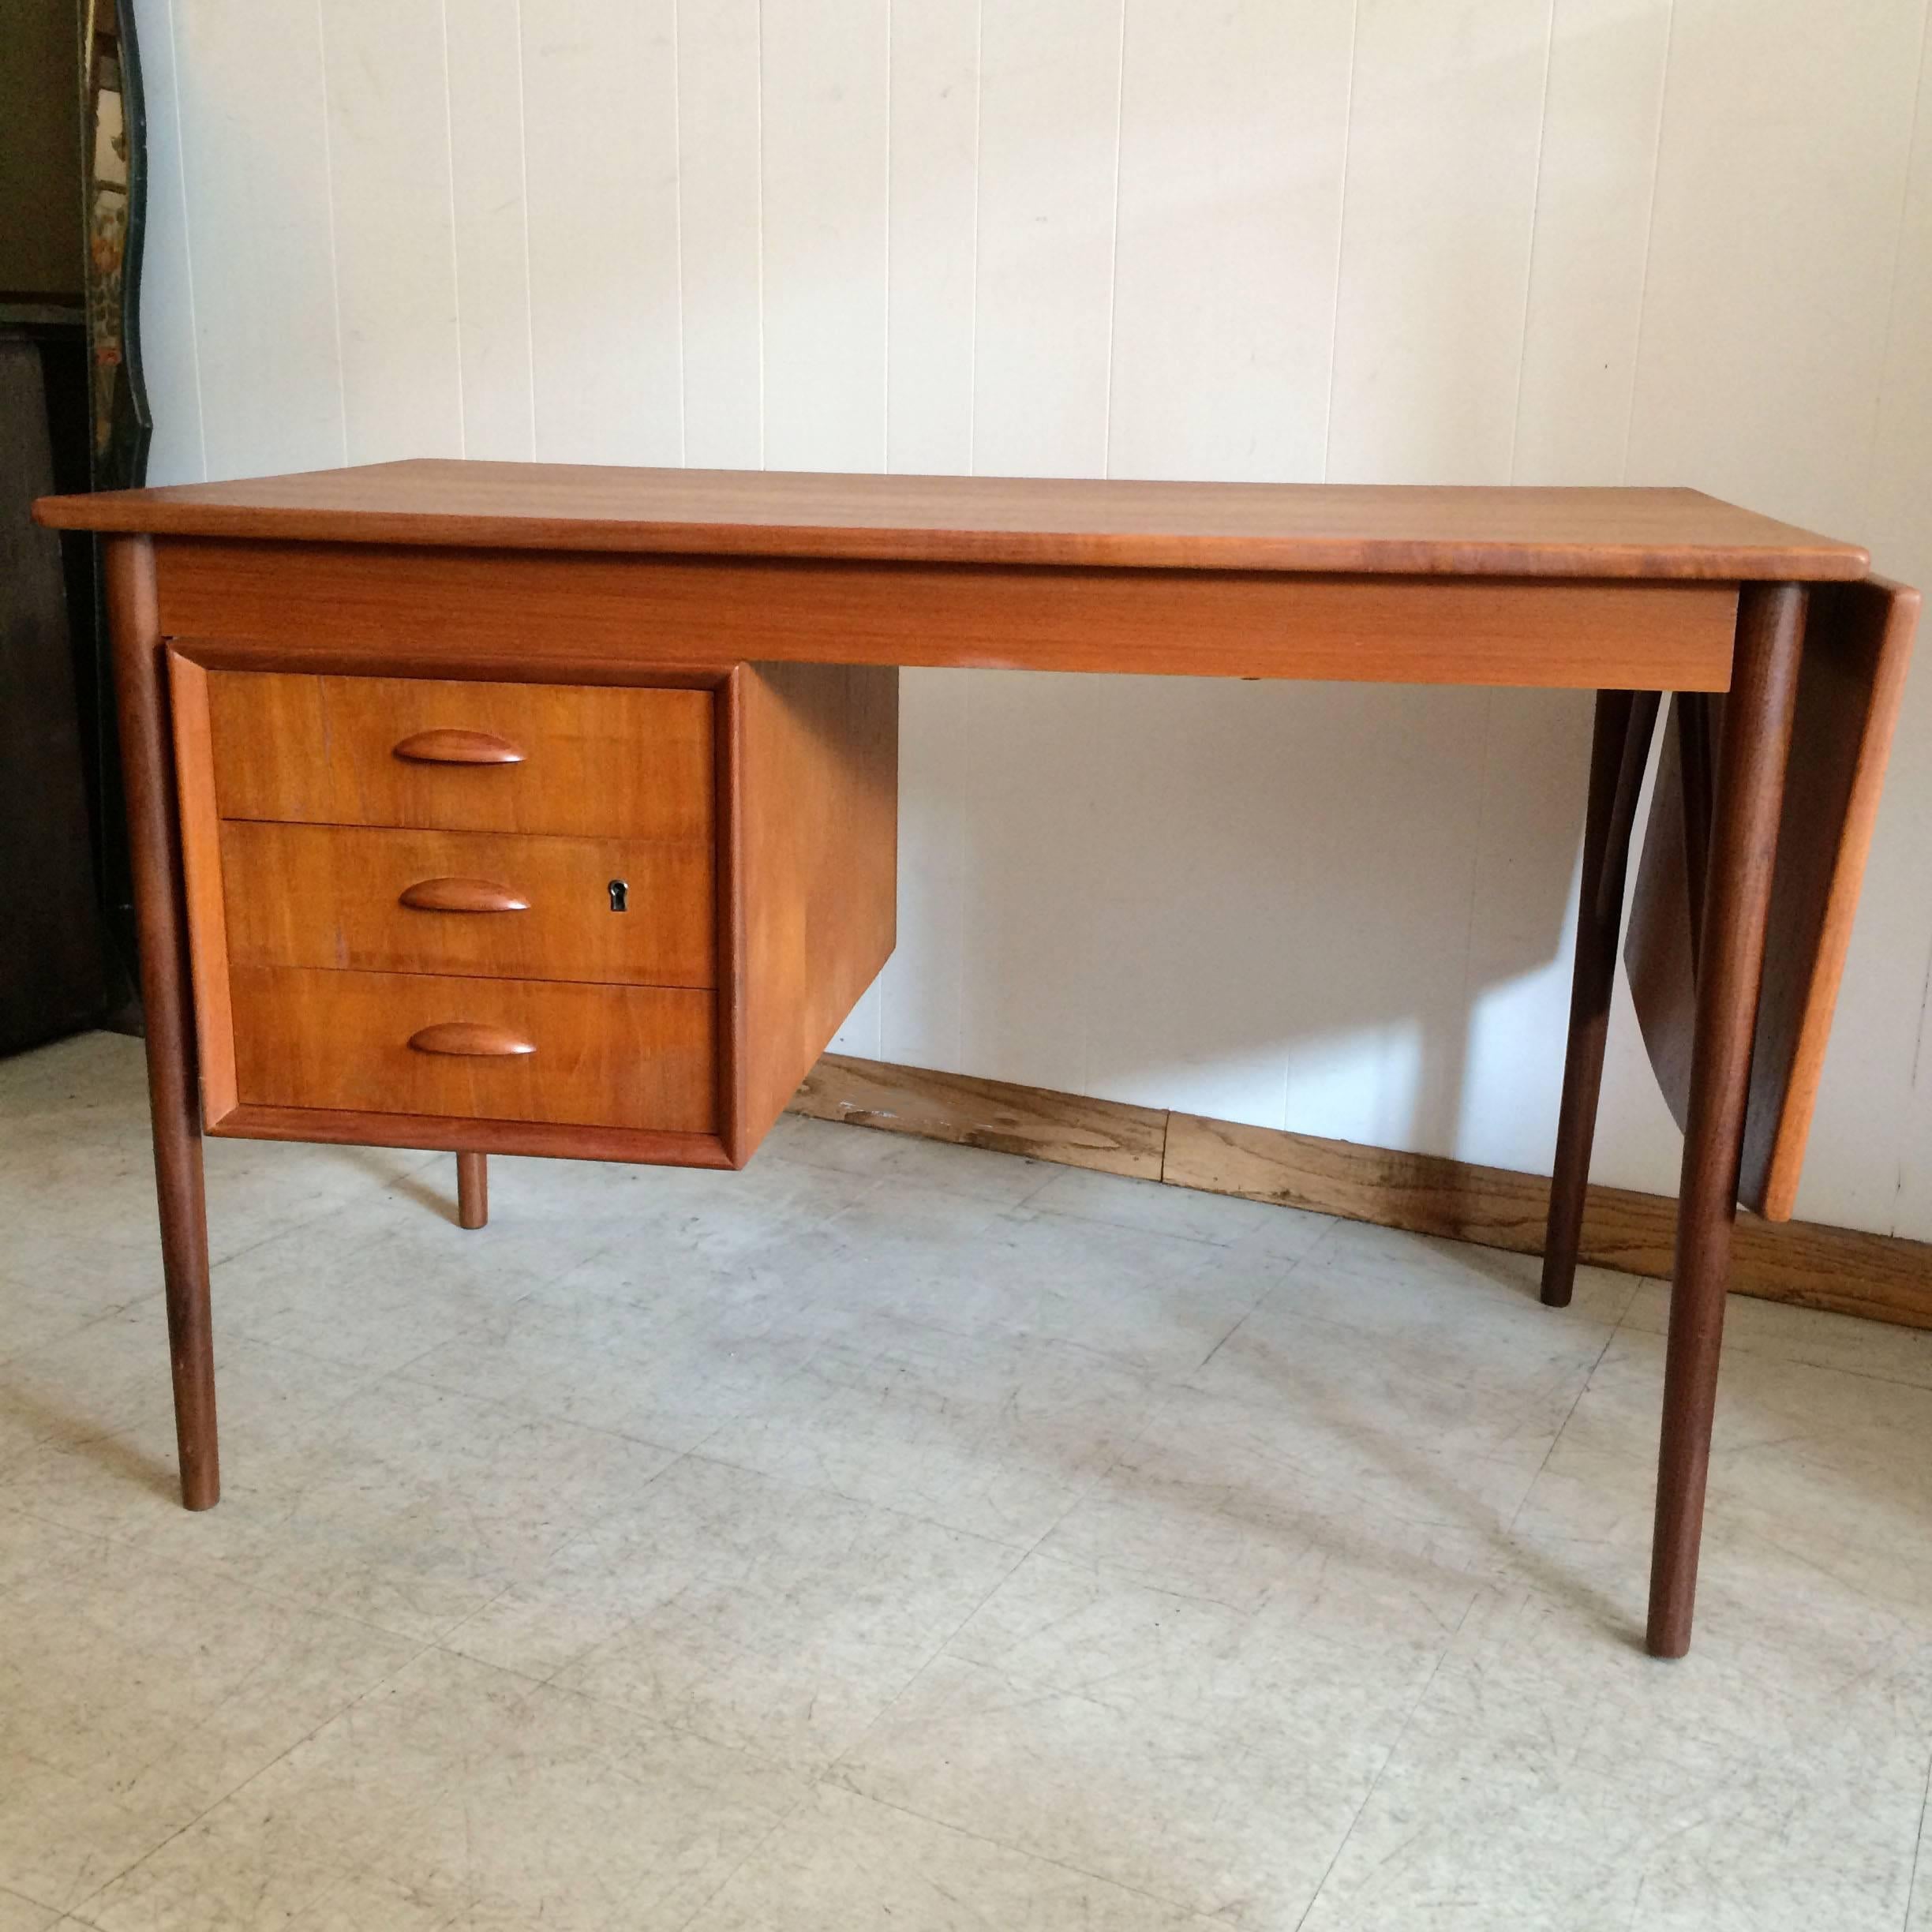 Danish modern, teak desk with drop leaf extension is finished in the back with a display bookshelf. Wonderful details include tapered legs, curved drop-leaf edge and cup pulls. Marked made in Denmark. Desk extends from 47